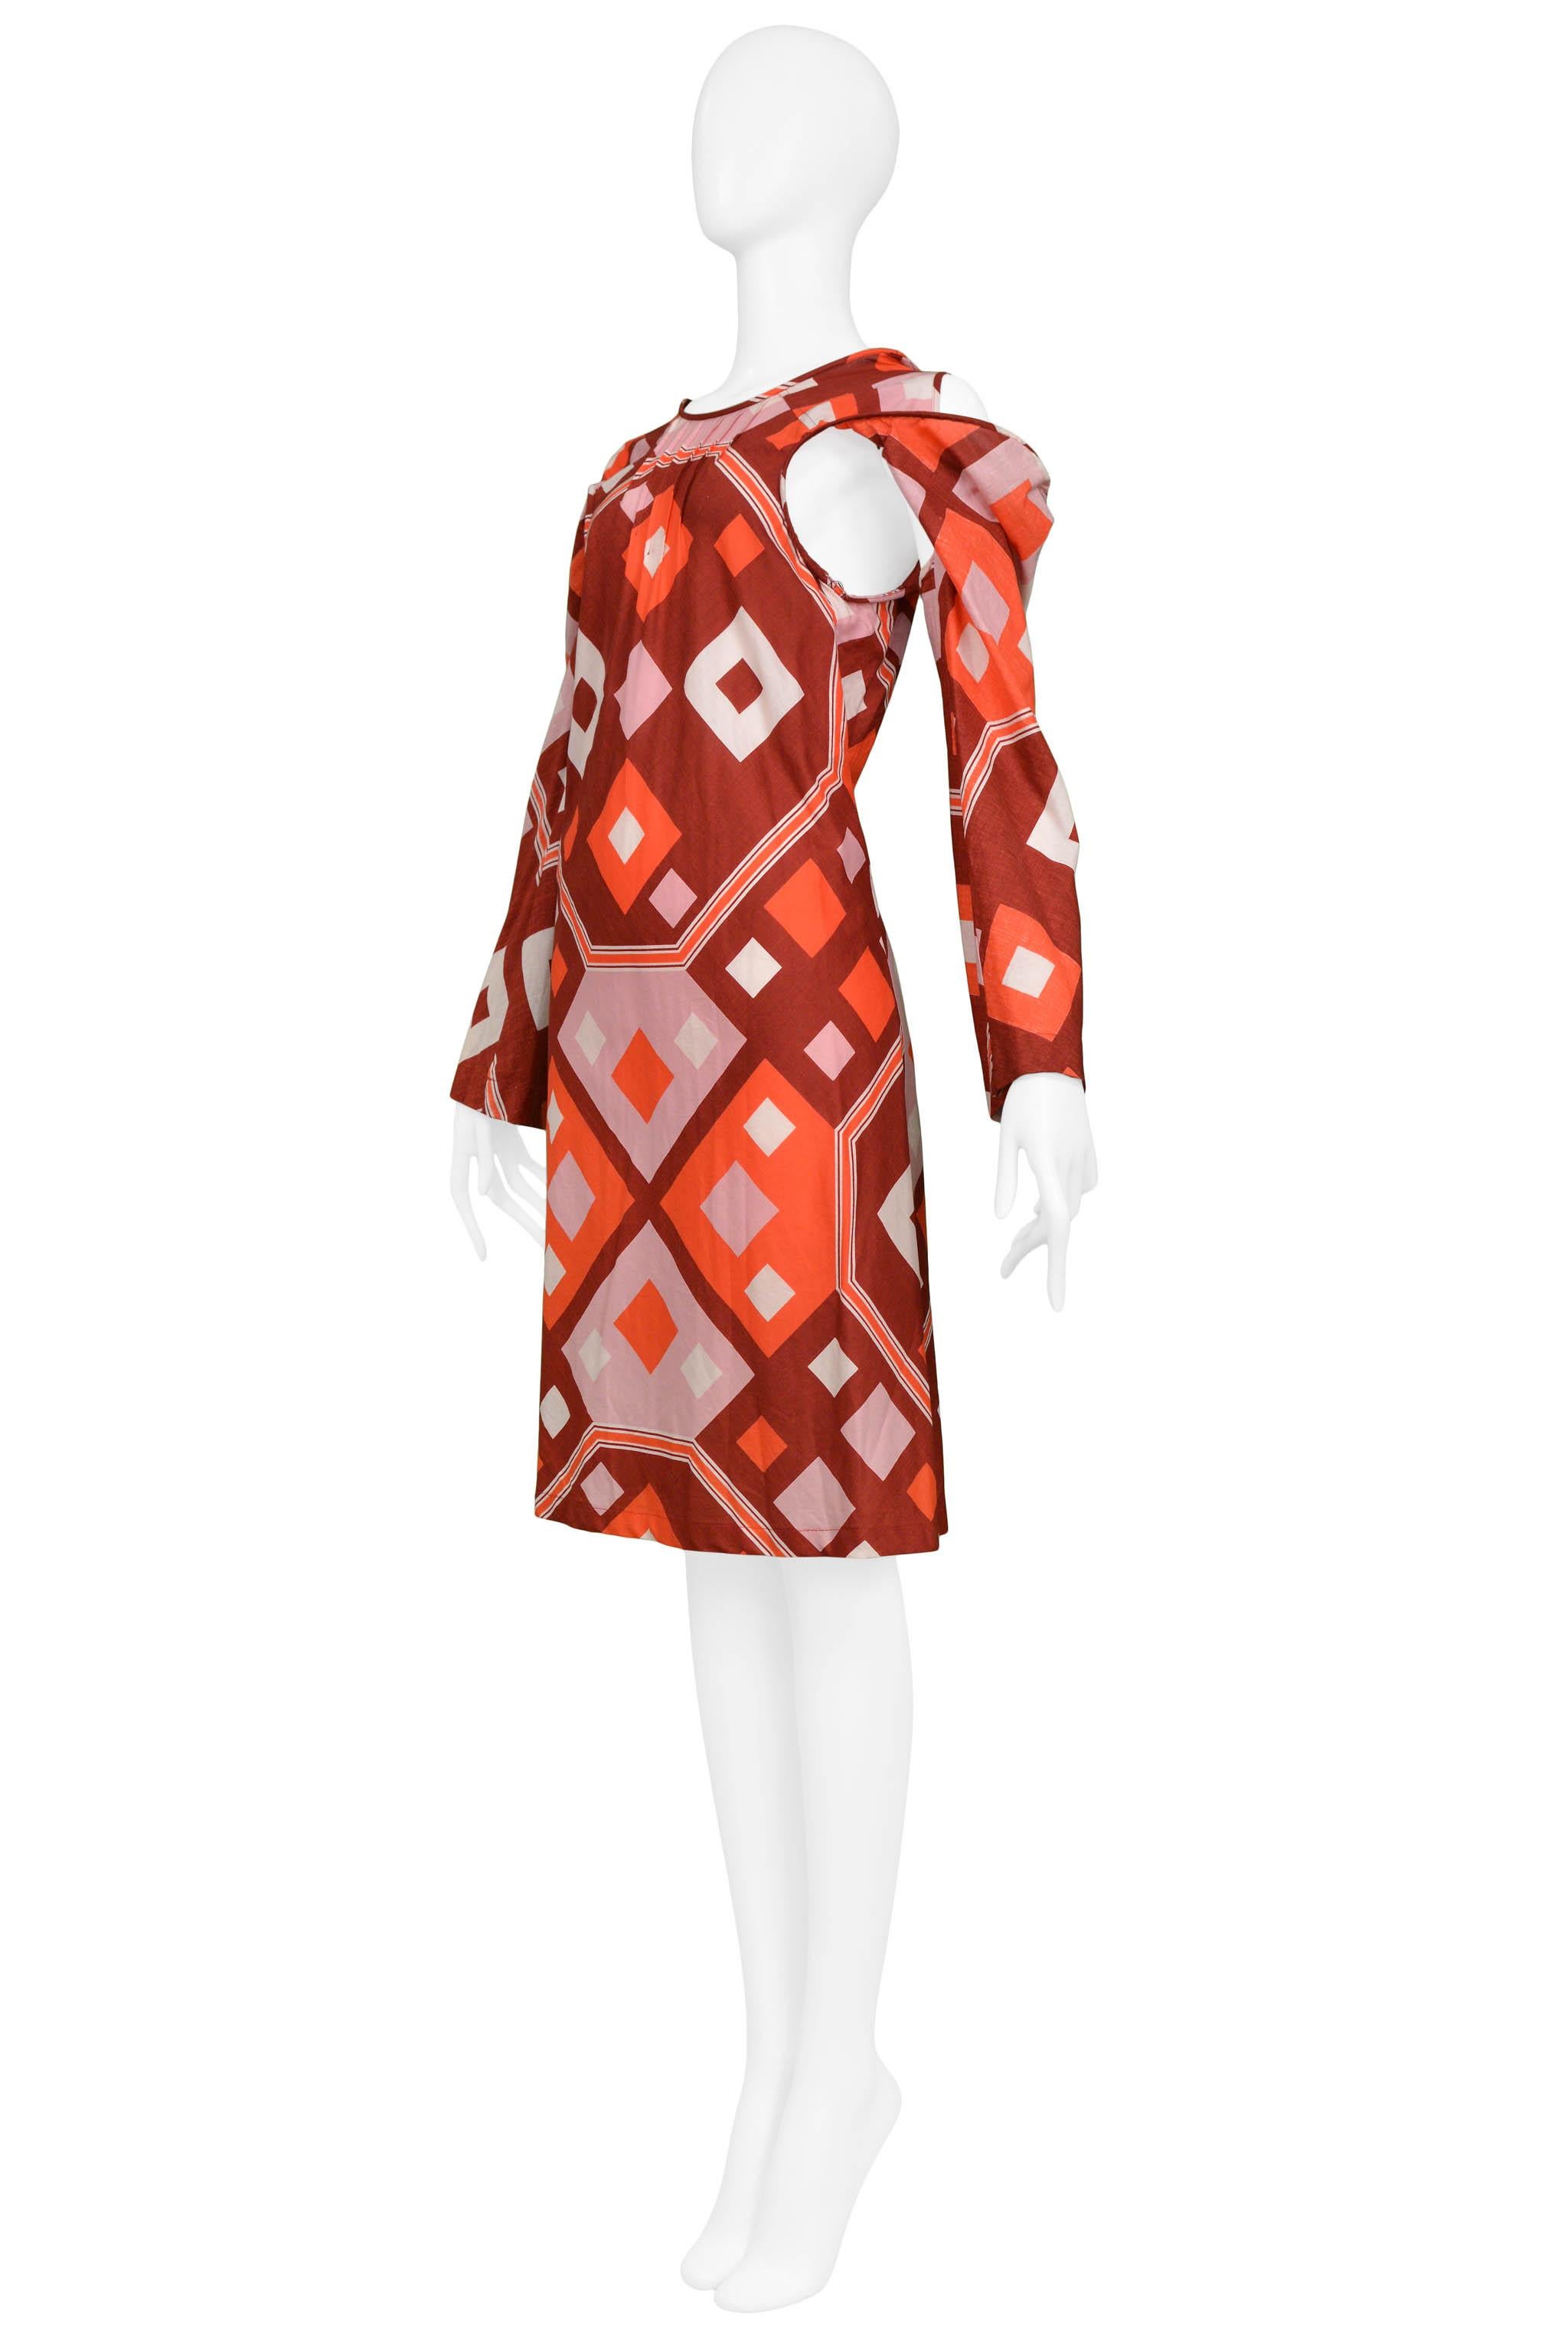 Junya Watanabe Art Deco Print Dress With Cutouts 2003 In Excellent Condition For Sale In Los Angeles, CA